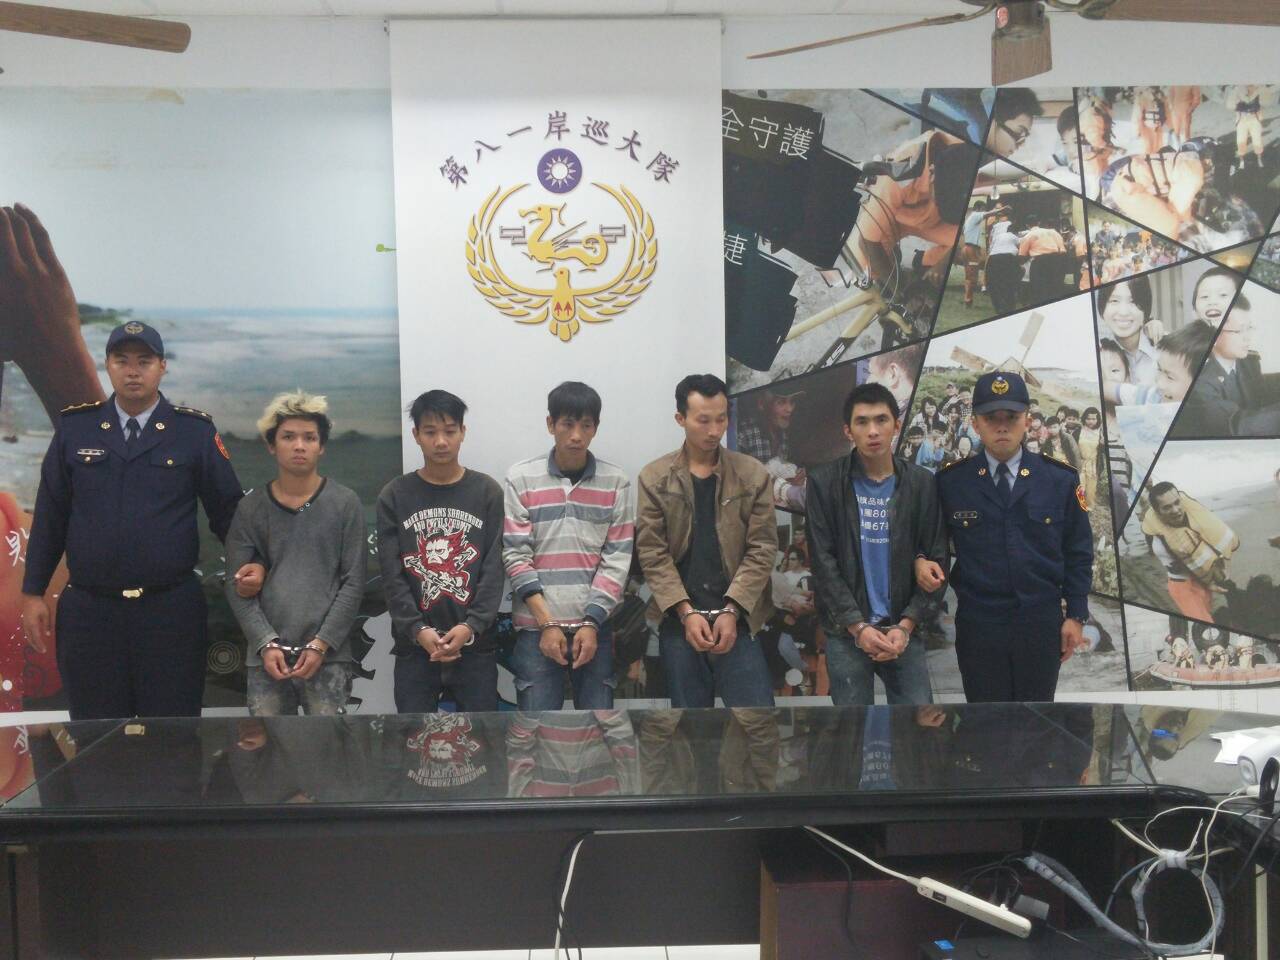 10 escaped vietnamess workers were seized by Coast Guard